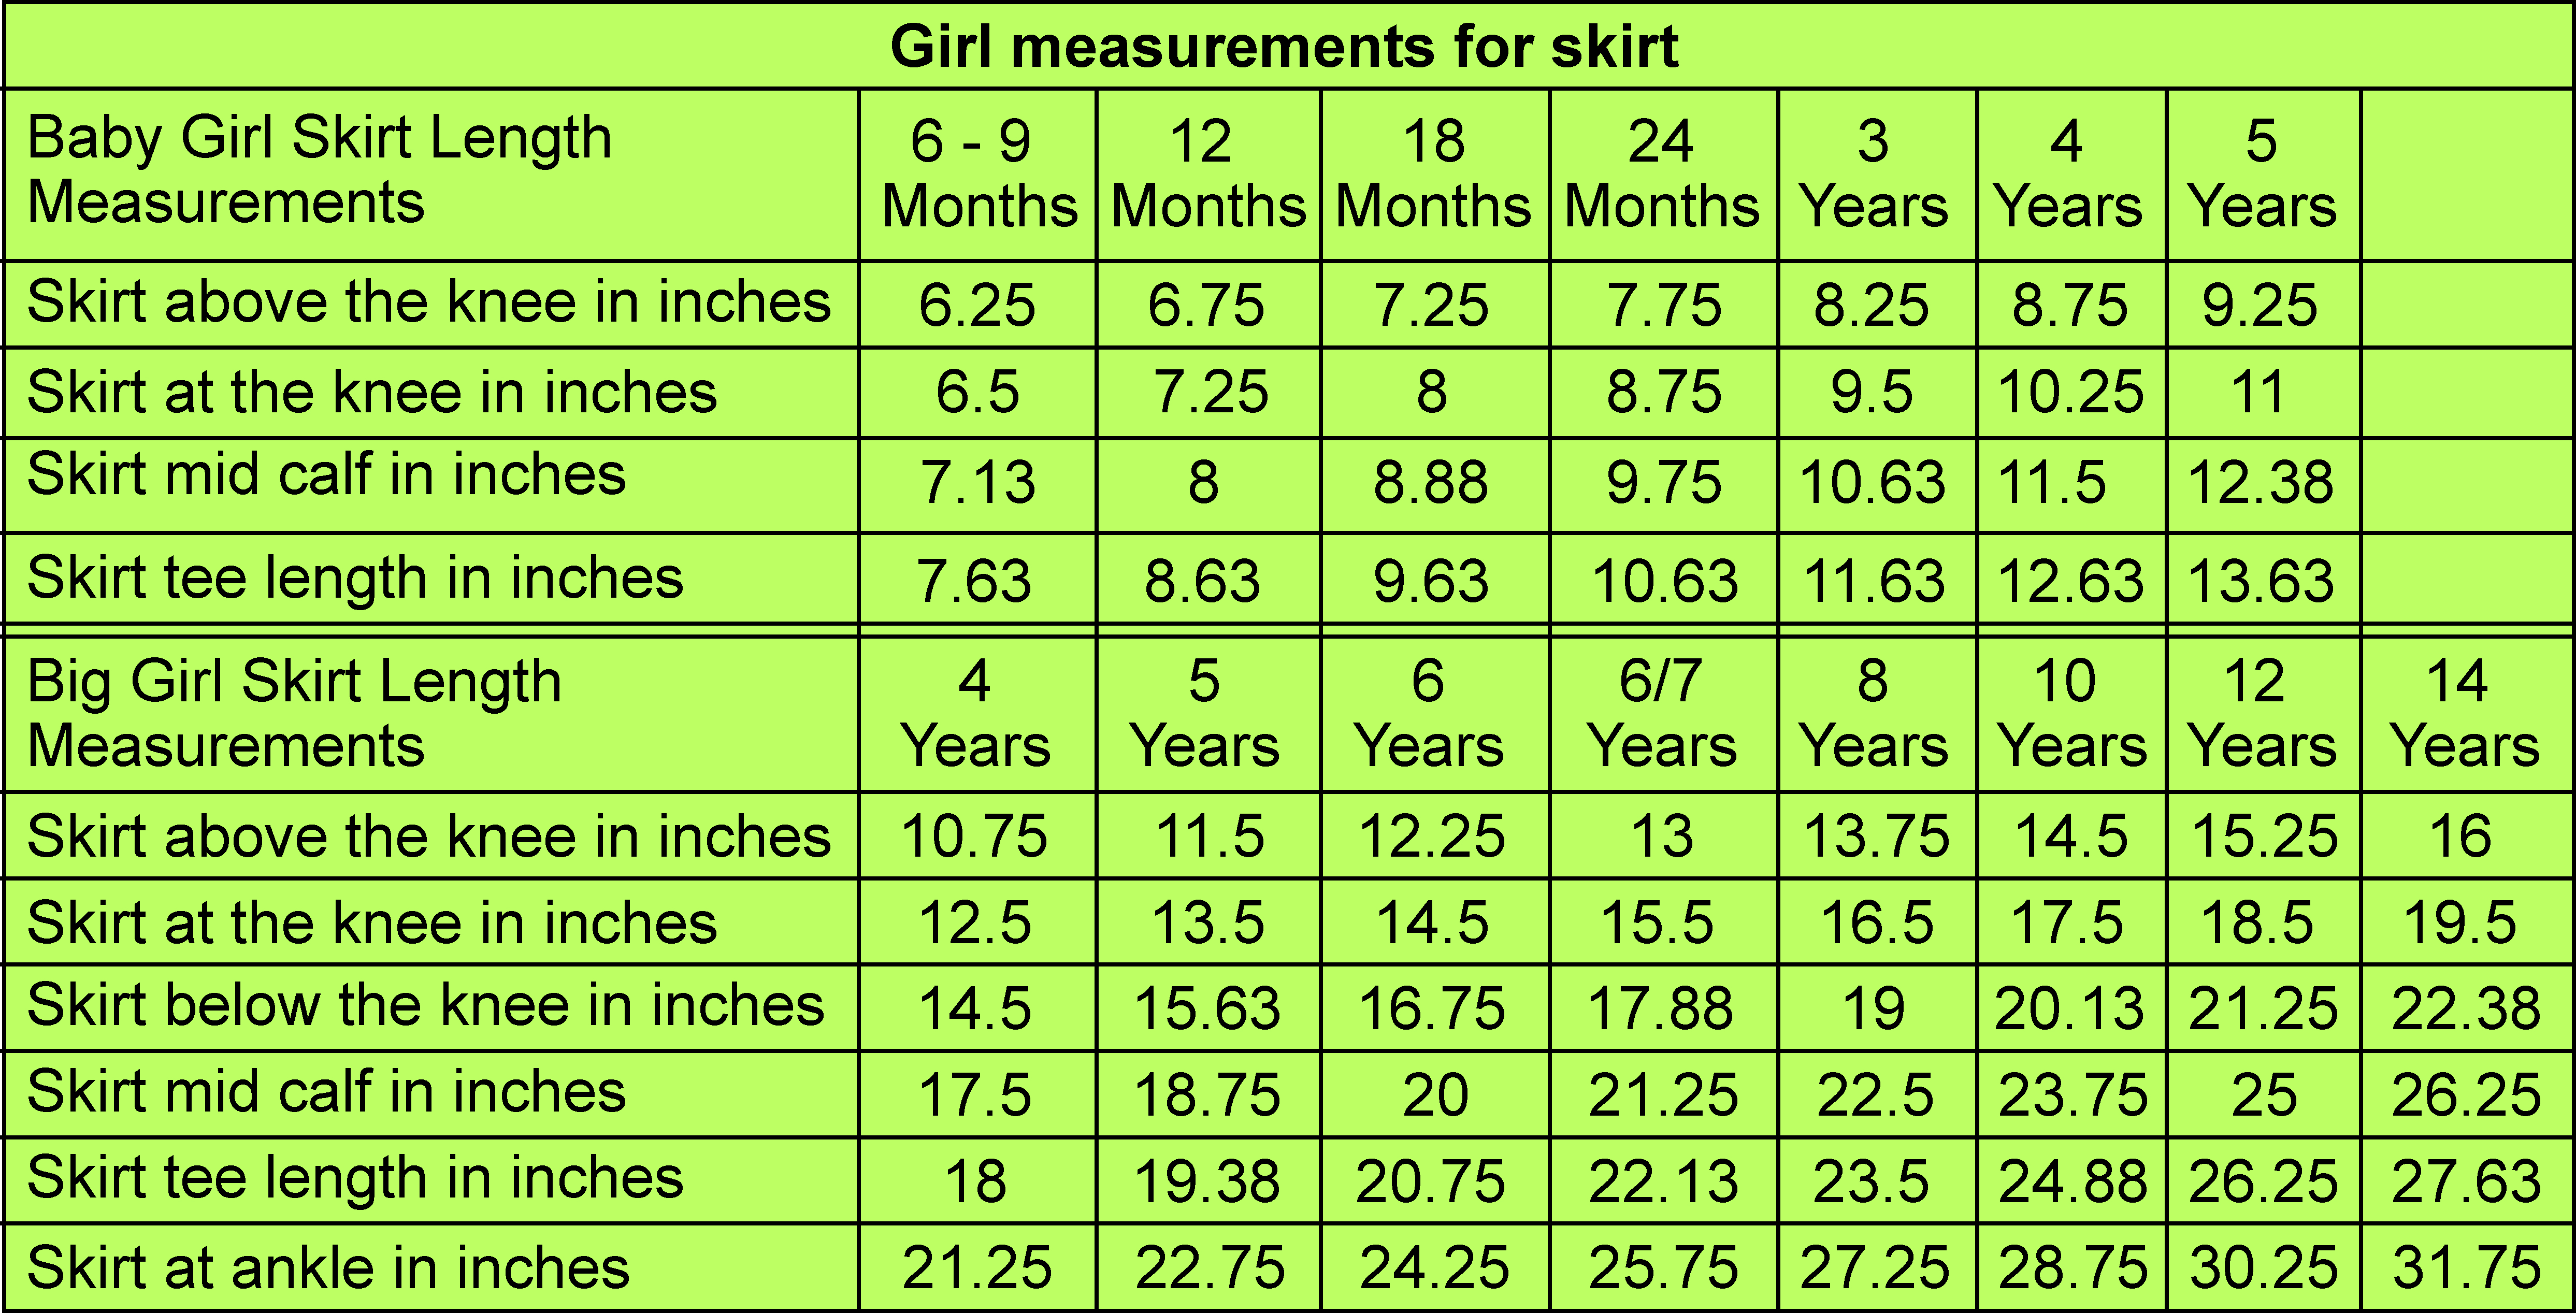 us standard size chart for children's clothing